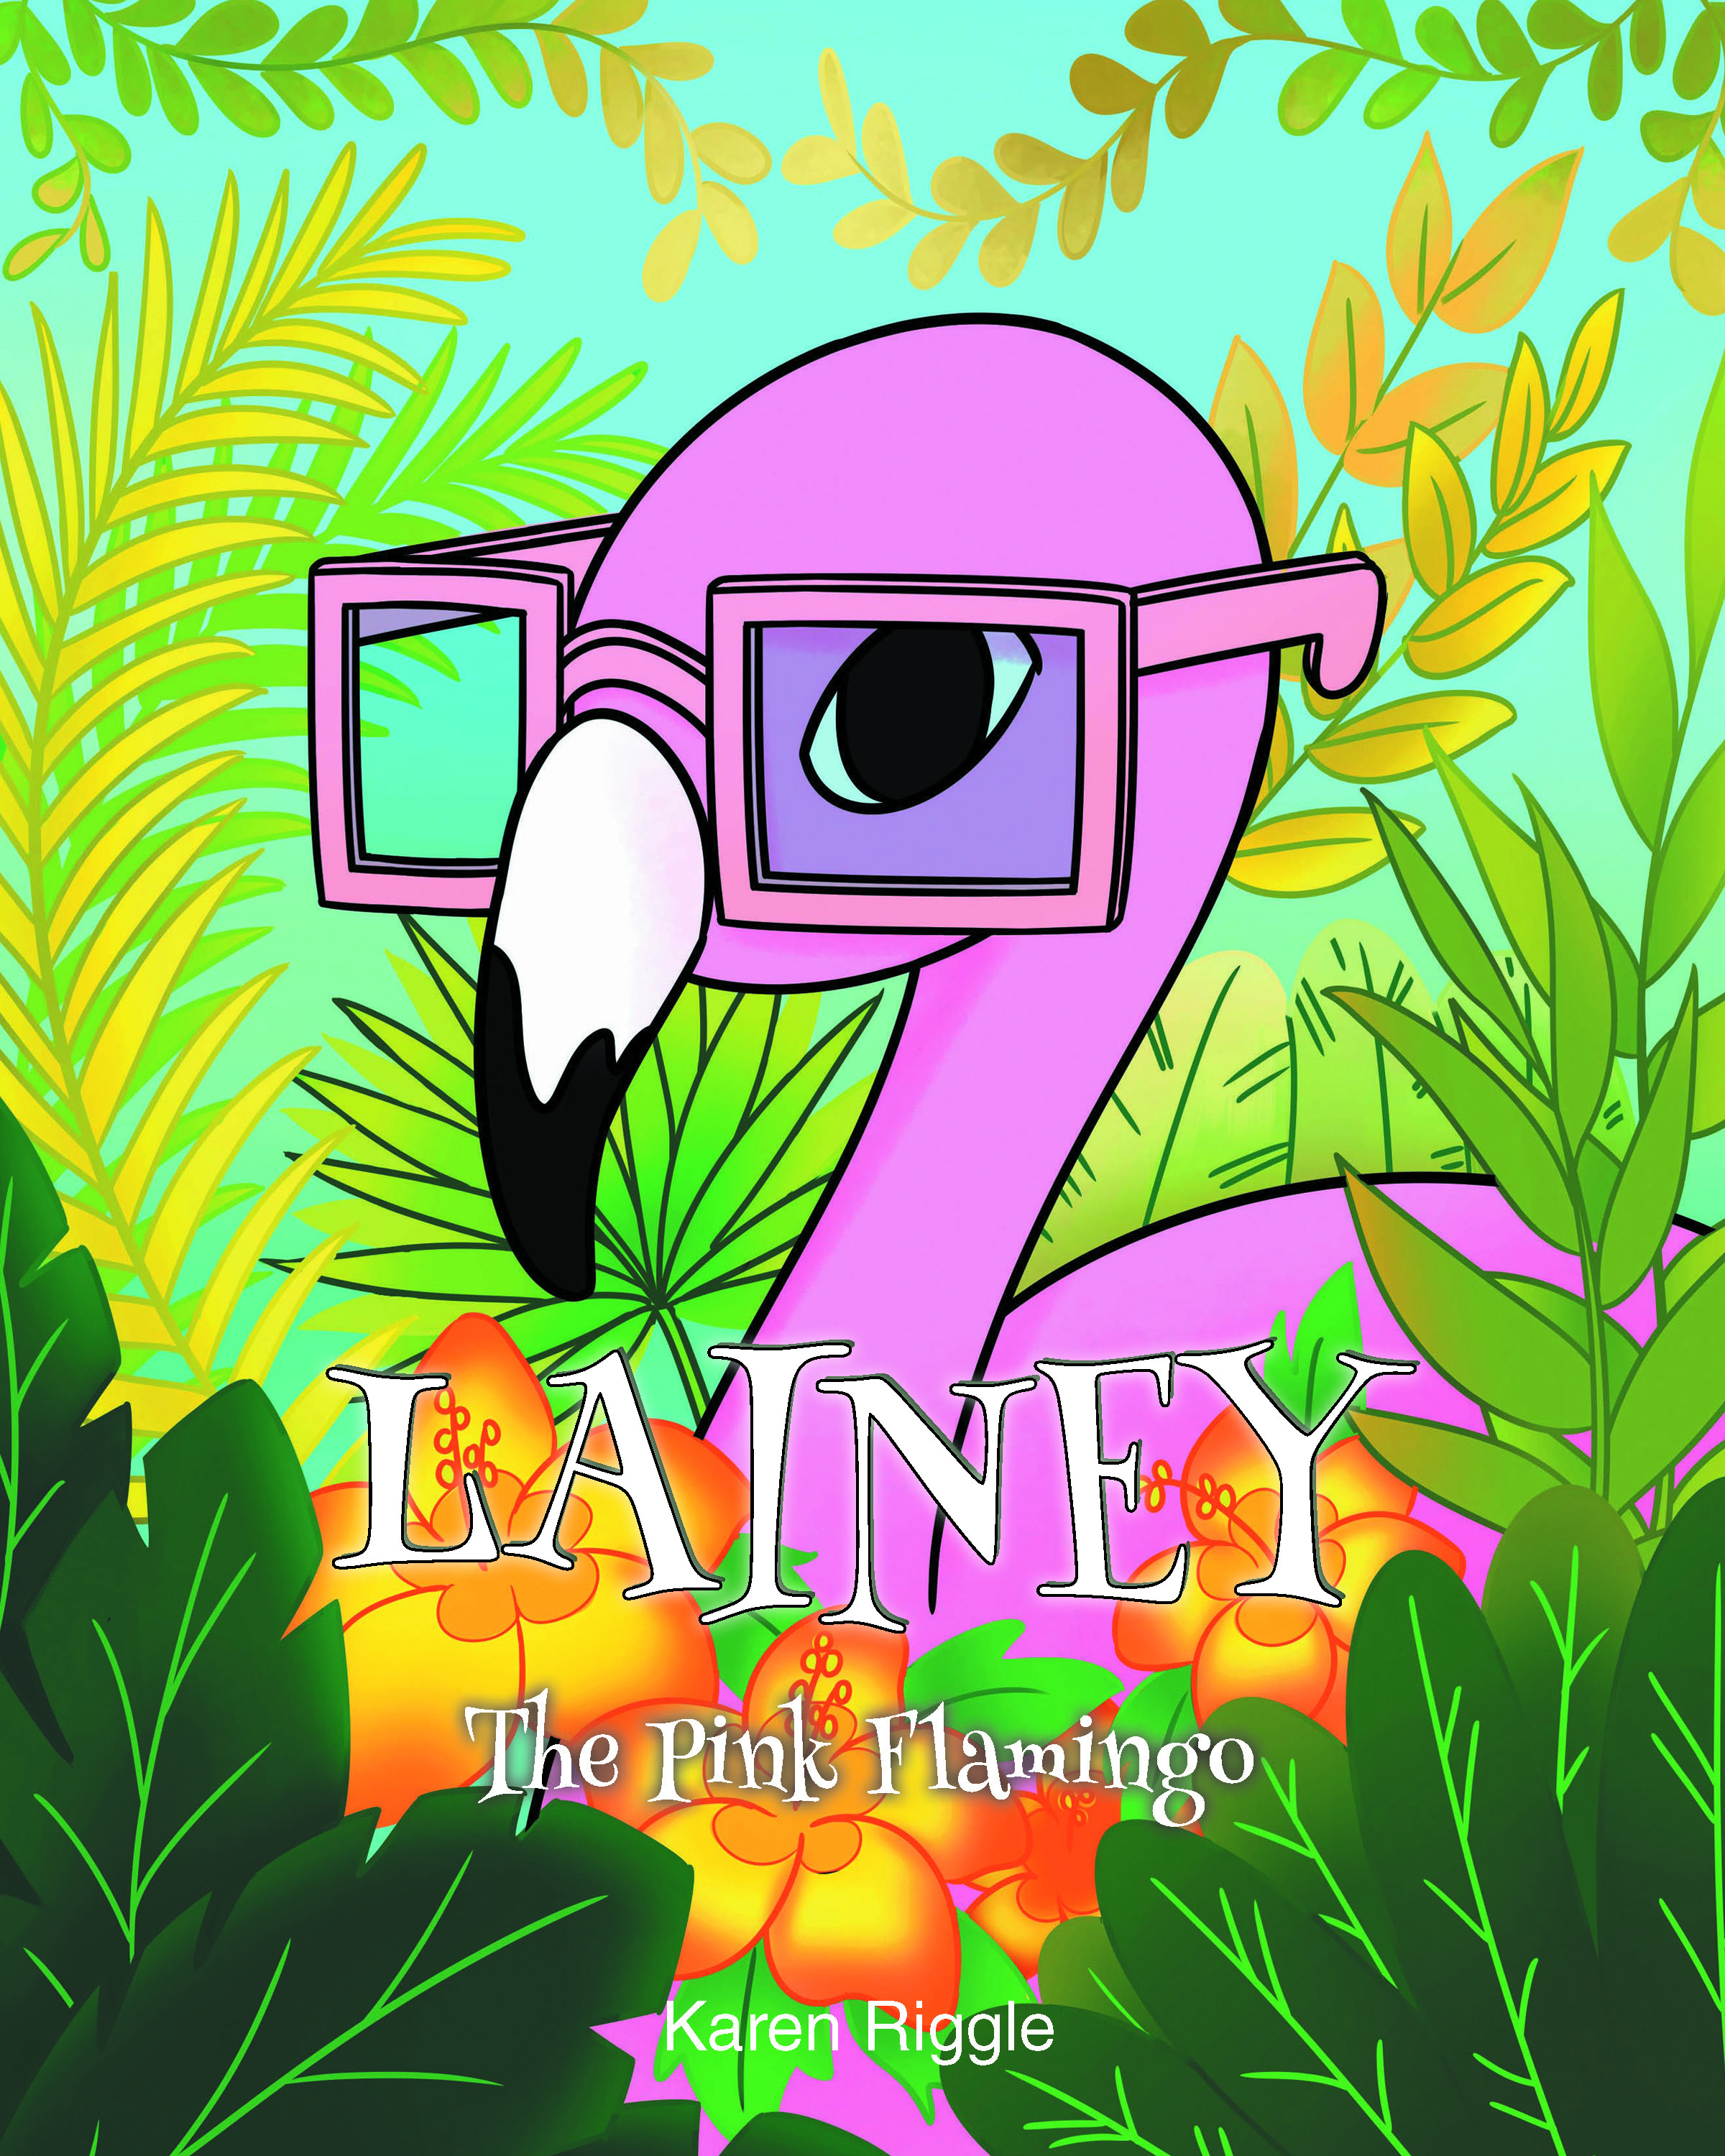 Karen Riggle’s Newly Released "Lainey The Pink Flamingo" is a Charming Tale of Individuality and Acceptance